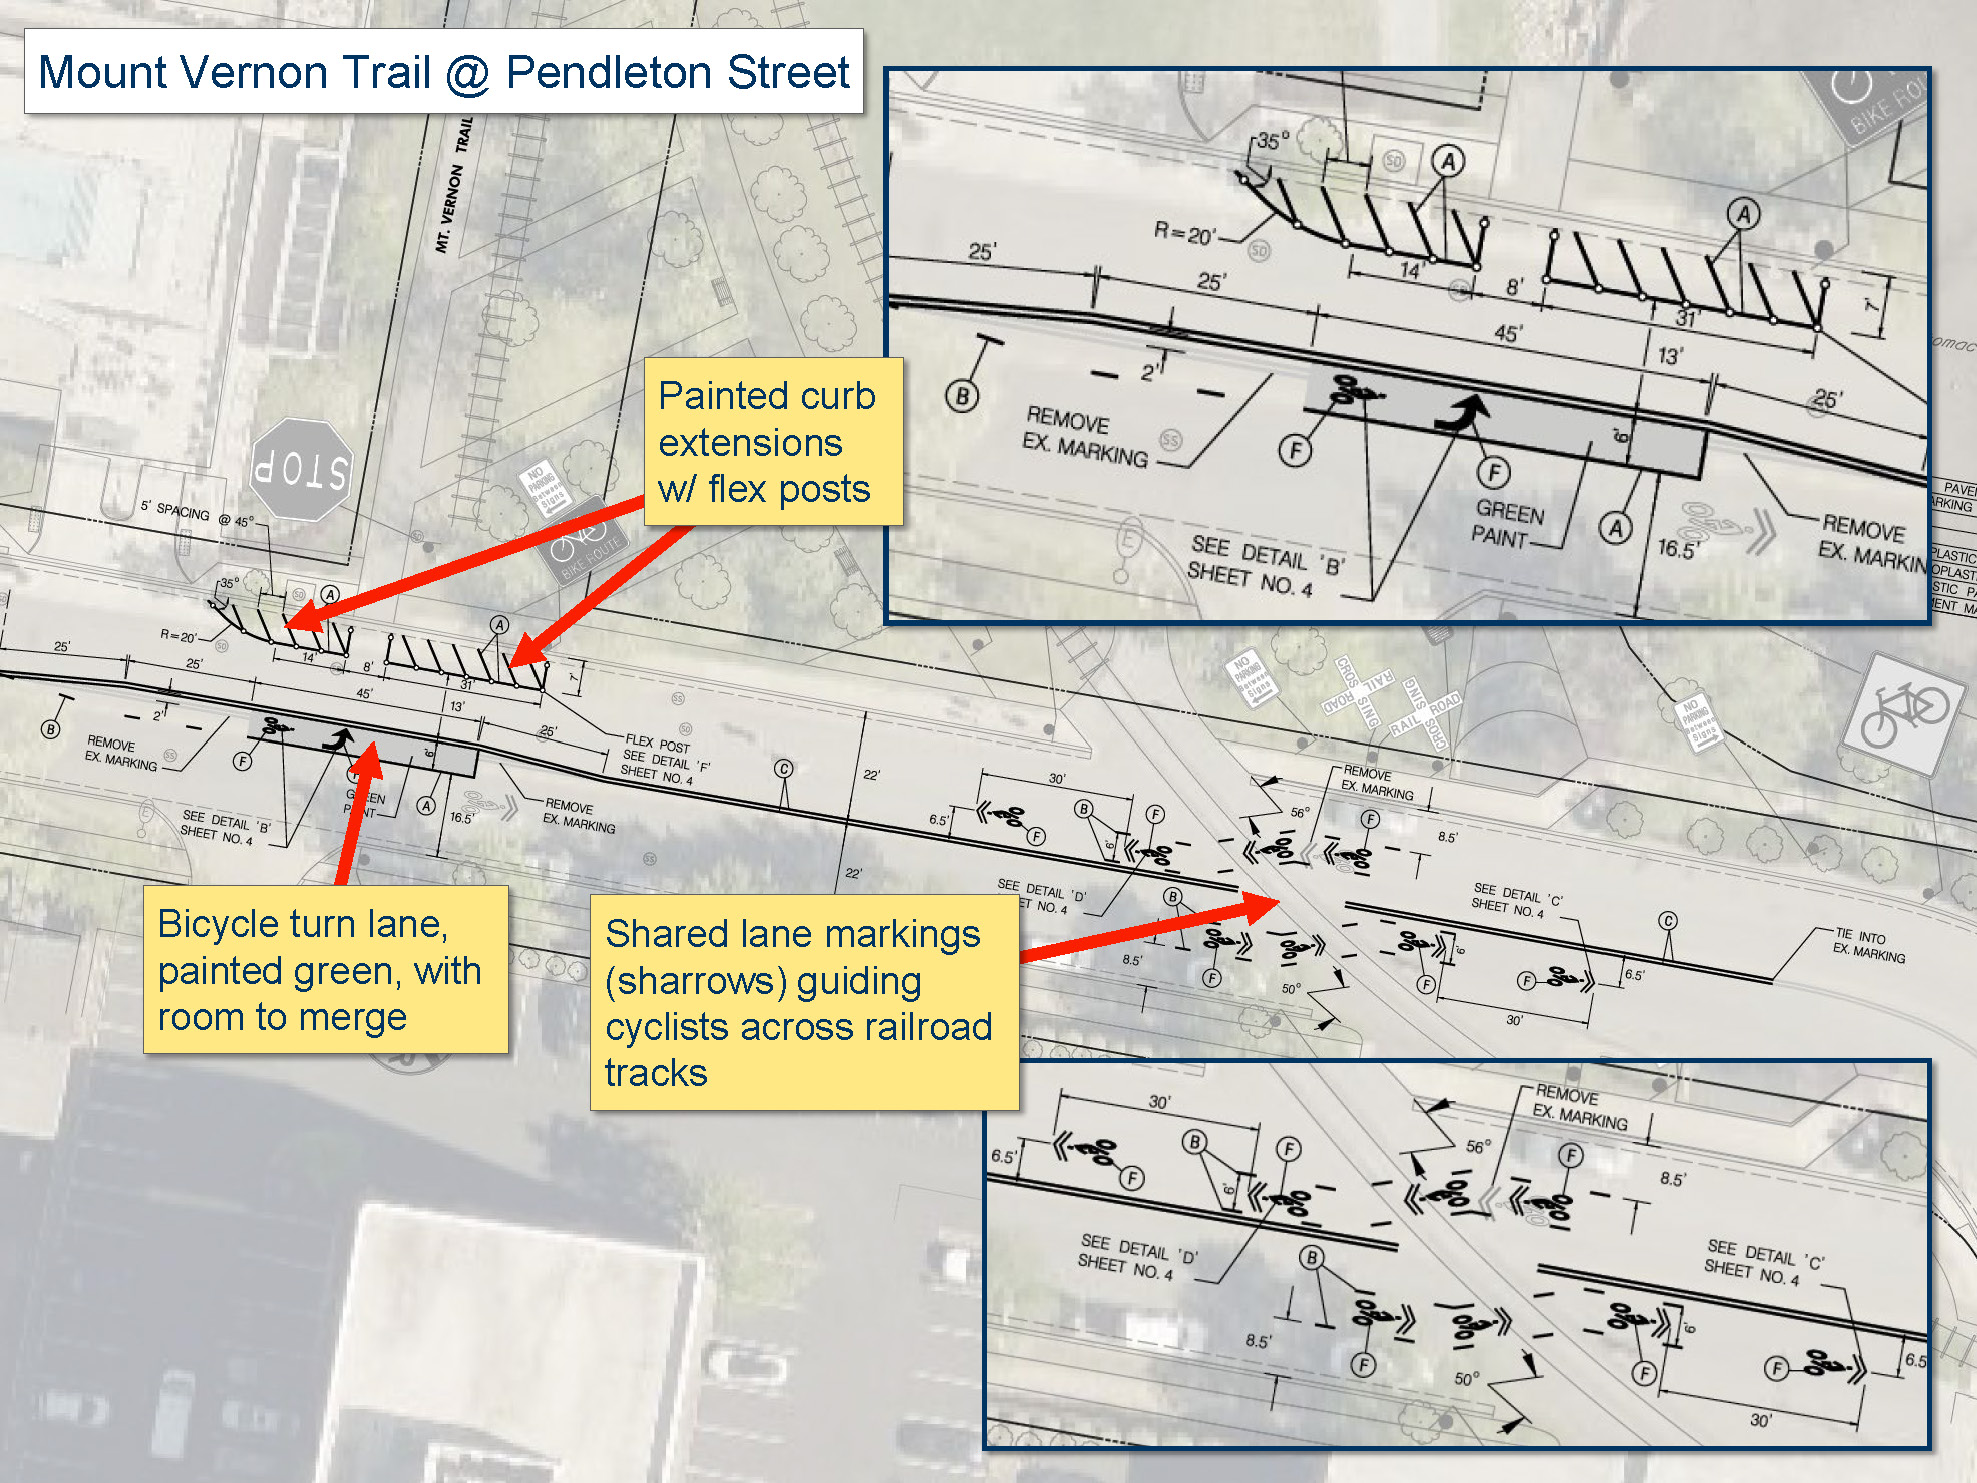 This images shows Mount Vernon Trail improvements at Pendleton Street